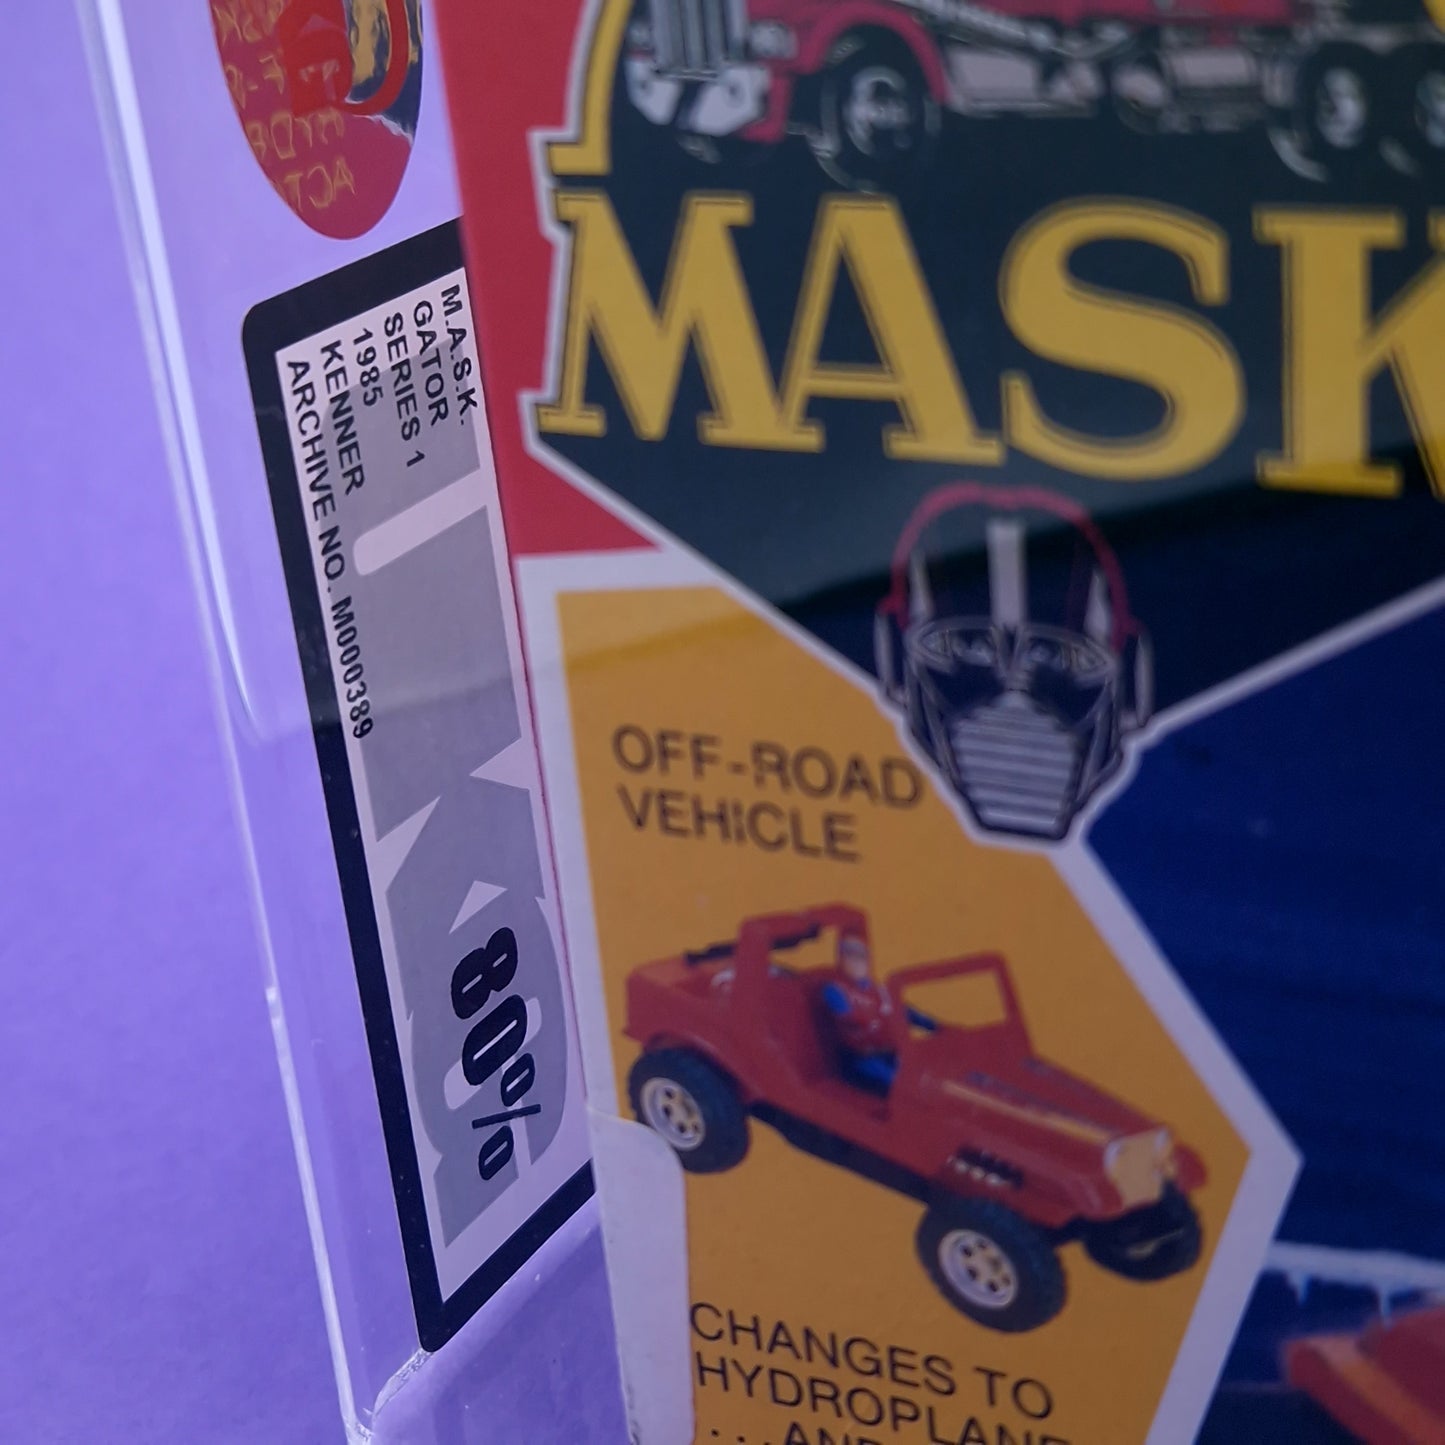 M.A.S.K ☆ GATOR DUSTY HAYES Figure Vehicle ☆ GRADED UKG BOXED Vintage Kenner 80s